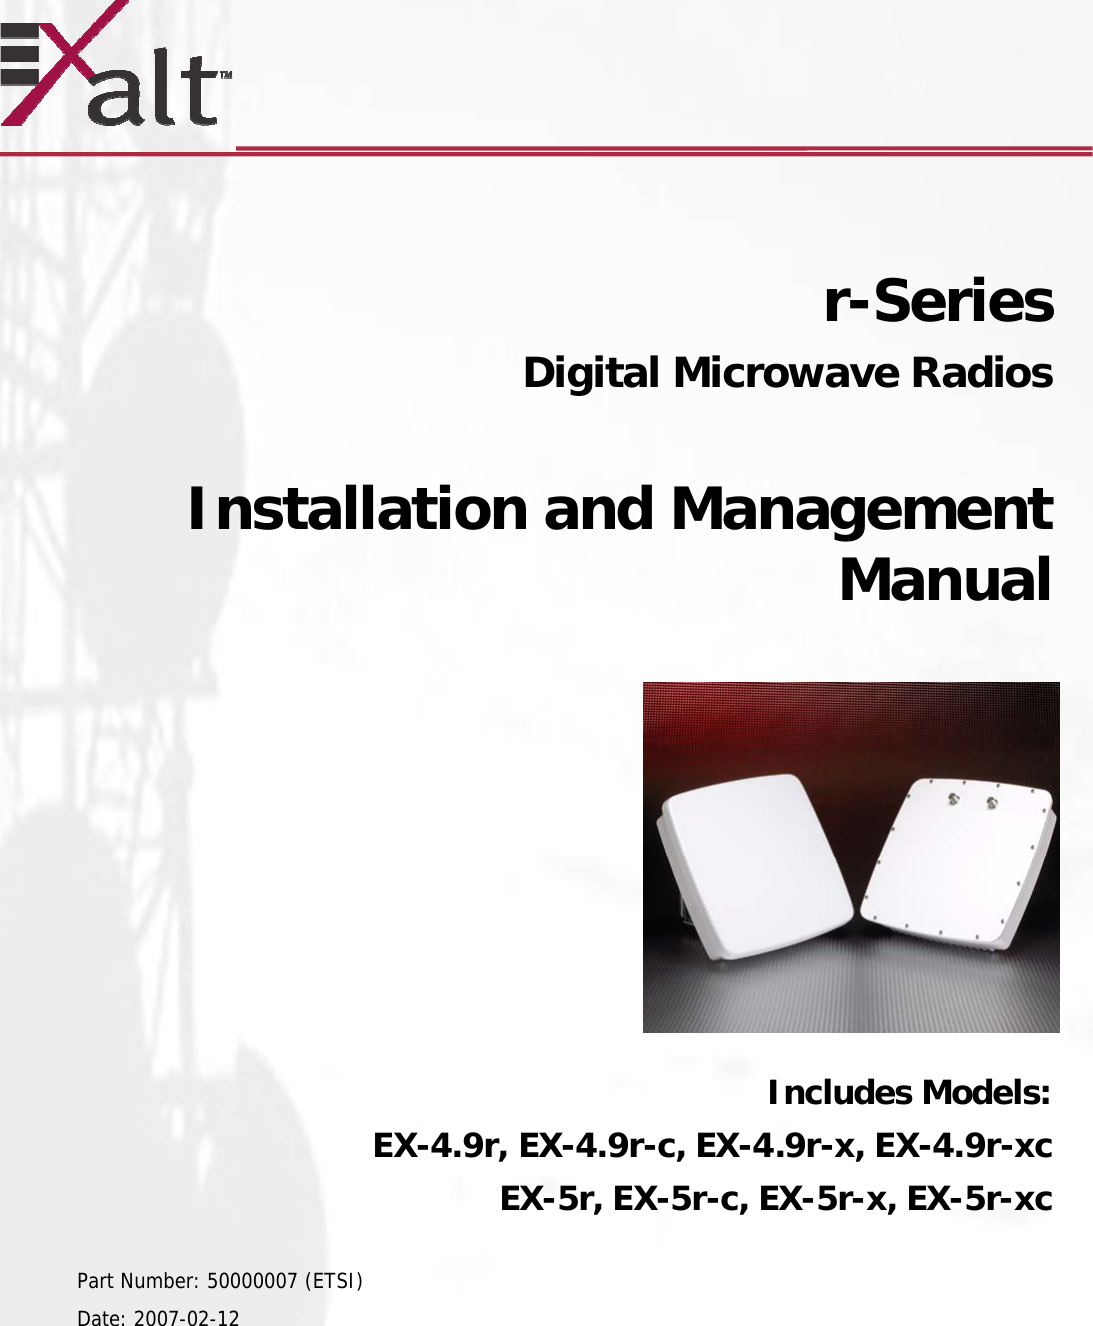       r-Series   Digital Microwave Radios   Installation and Management Manual            Includes Models: EX-4.9r, EX-4.9r-c, EX-4.9r-x, EX-4.9r-xc EX-5r, EX-5r-c, EX-5r-x, EX-5r-xc  Part Number: 50000007 (ETSI) Date: 2007-02-12  